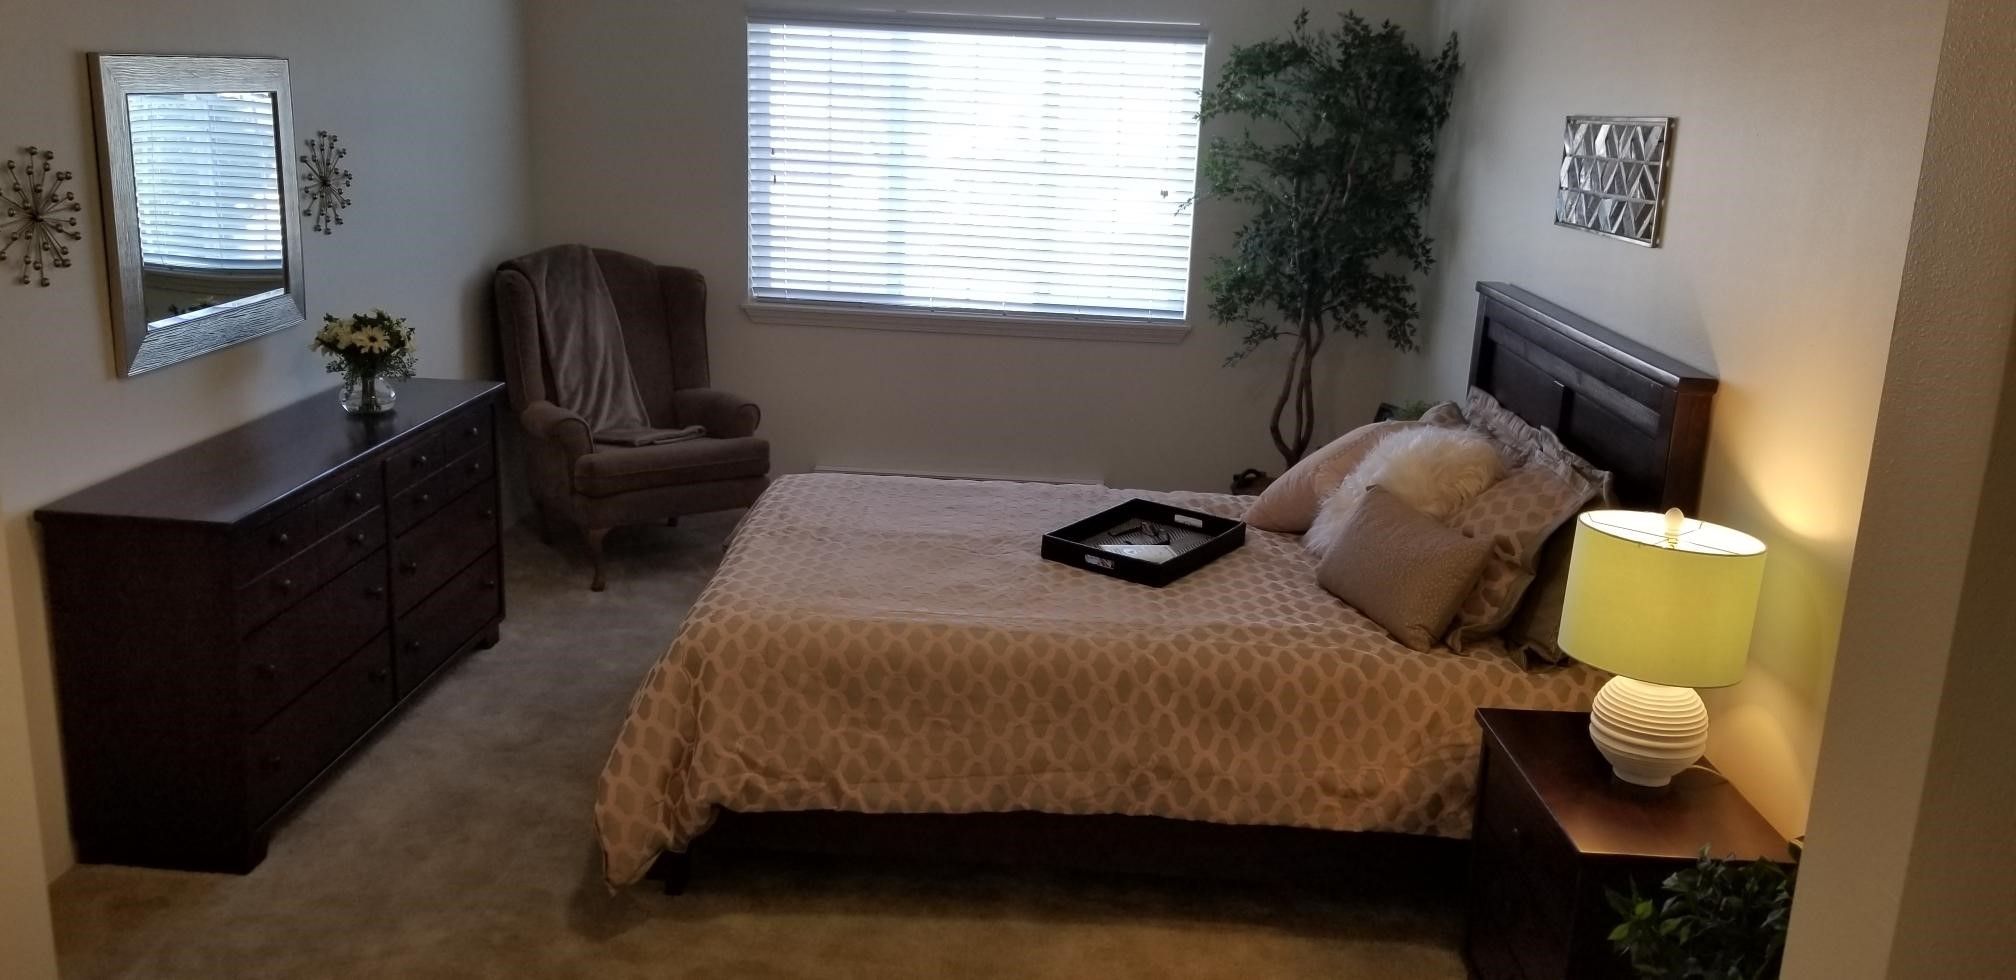 Interior of a bedroom at Solstice Senior Living At Apple Valley featuring modern decor and electronics.